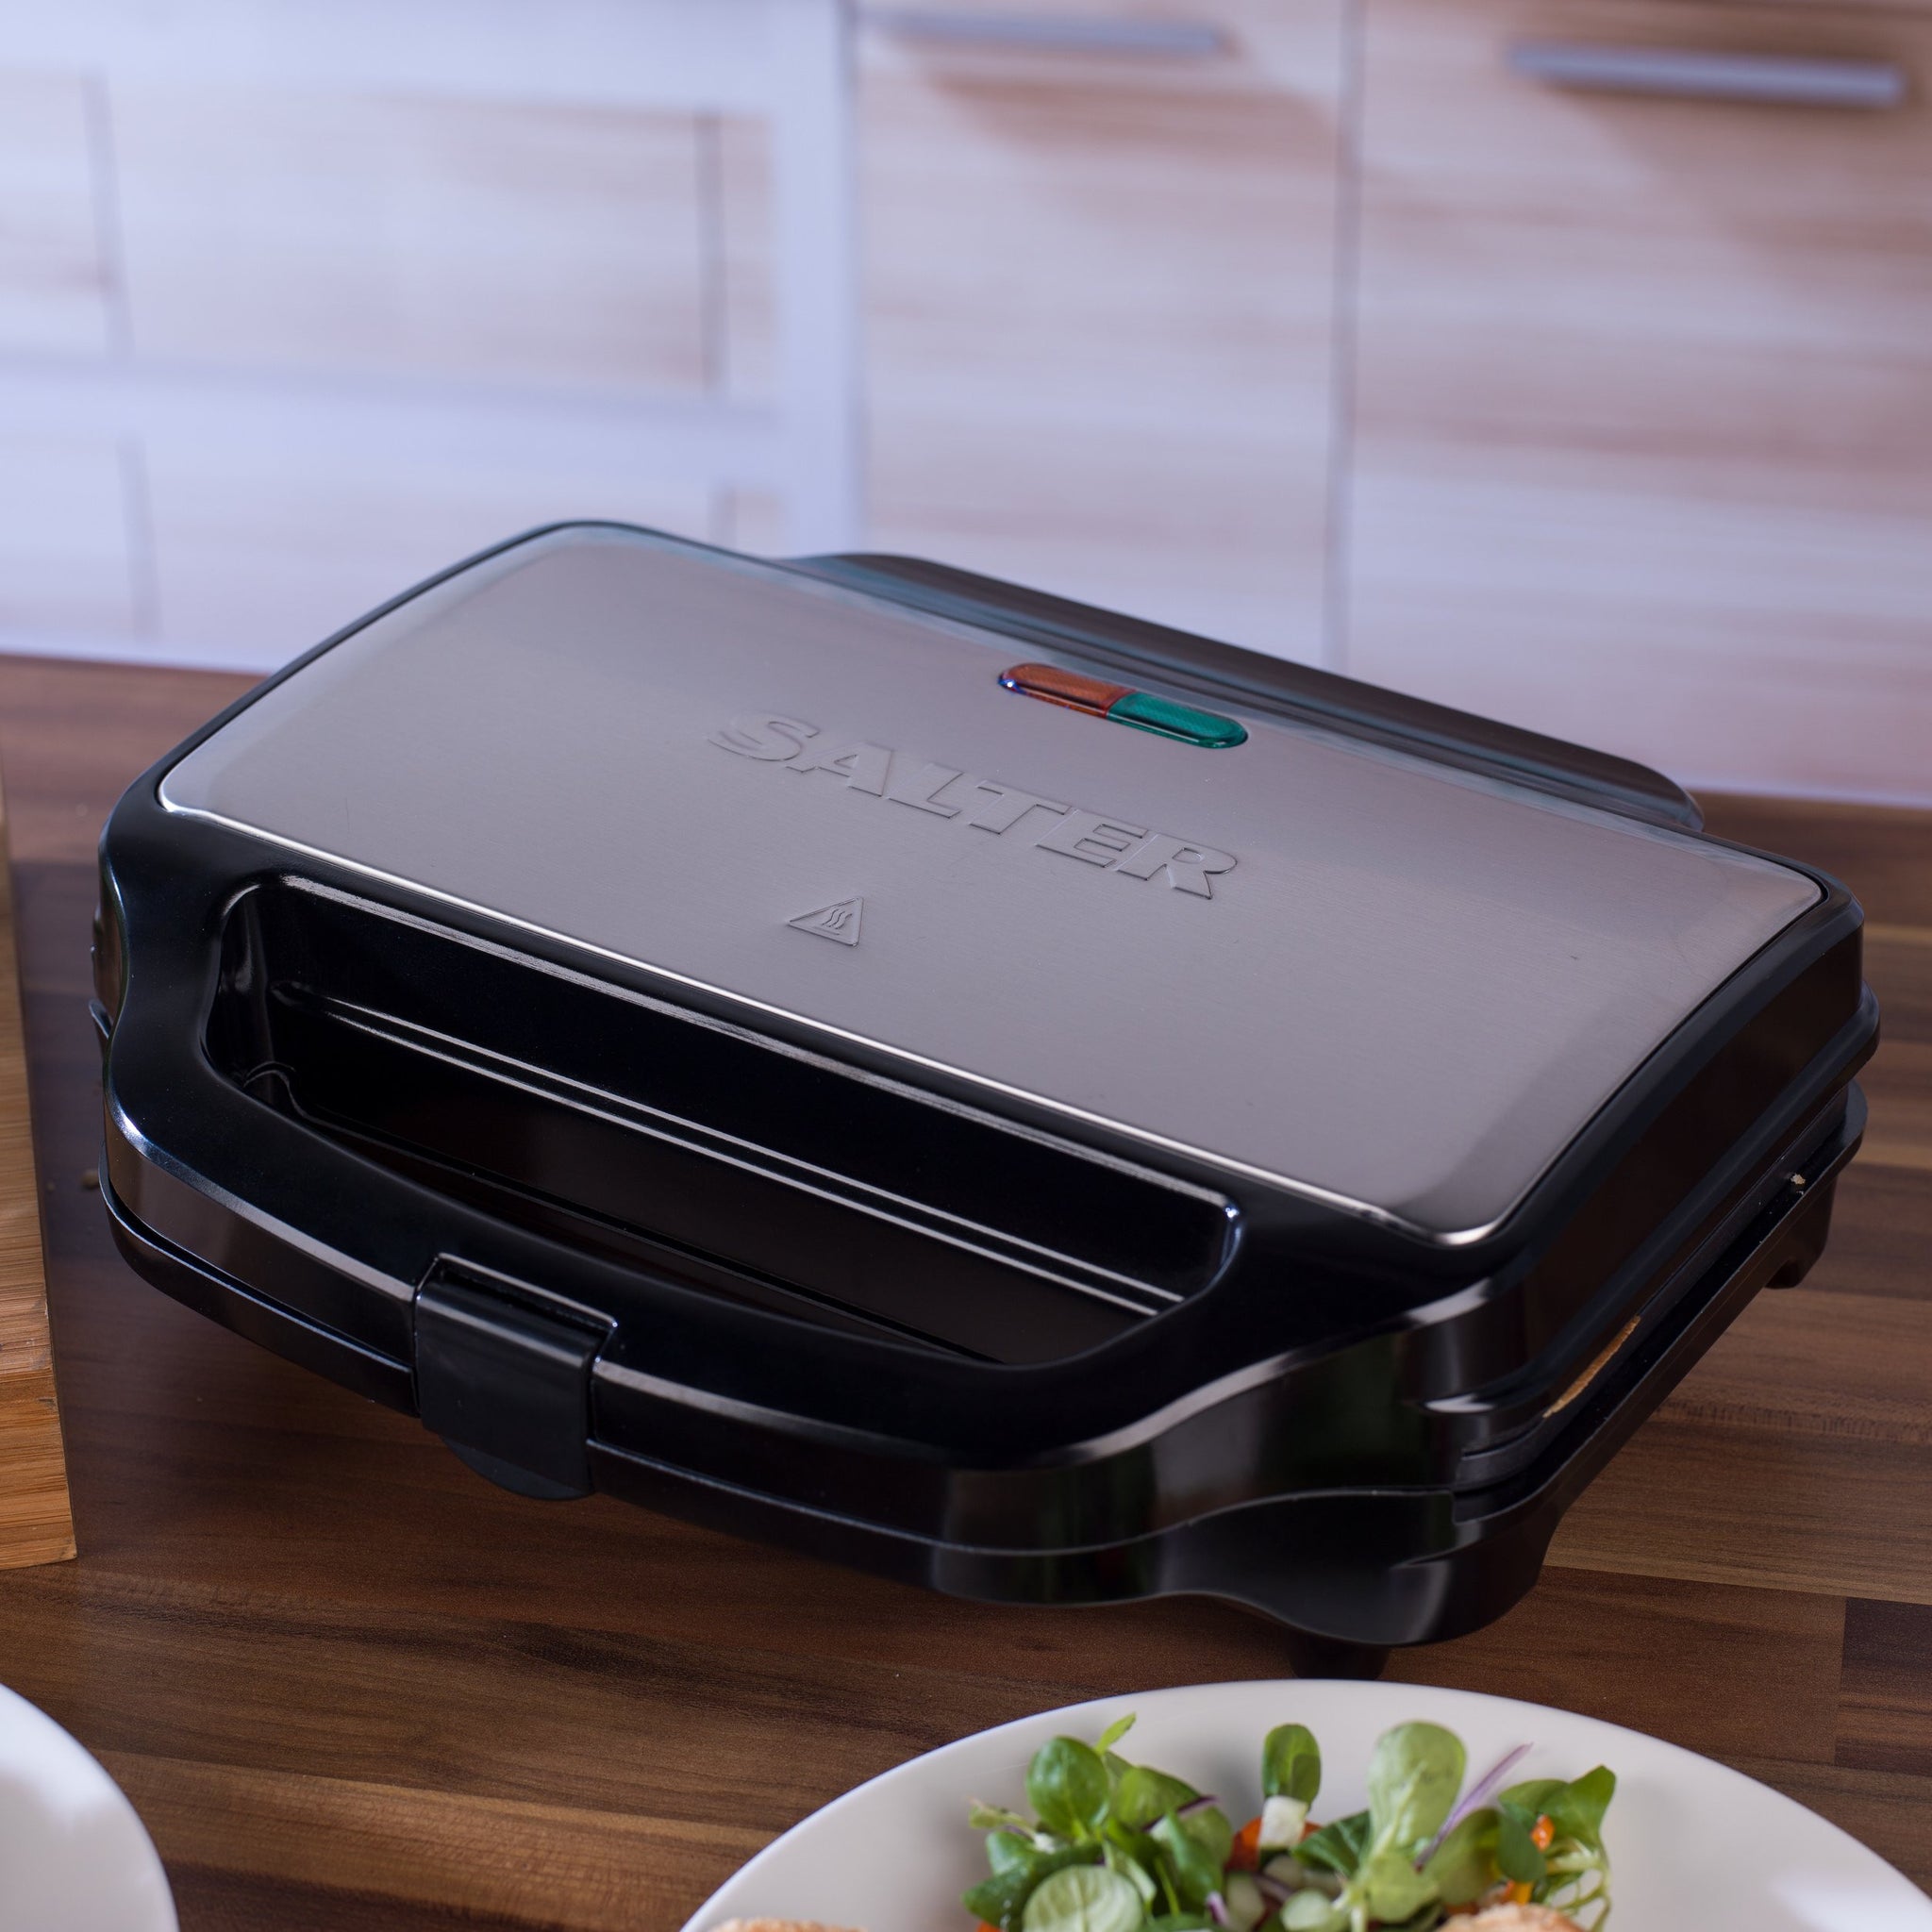 XXL Large Deep Fill Toastie Maker and Grill